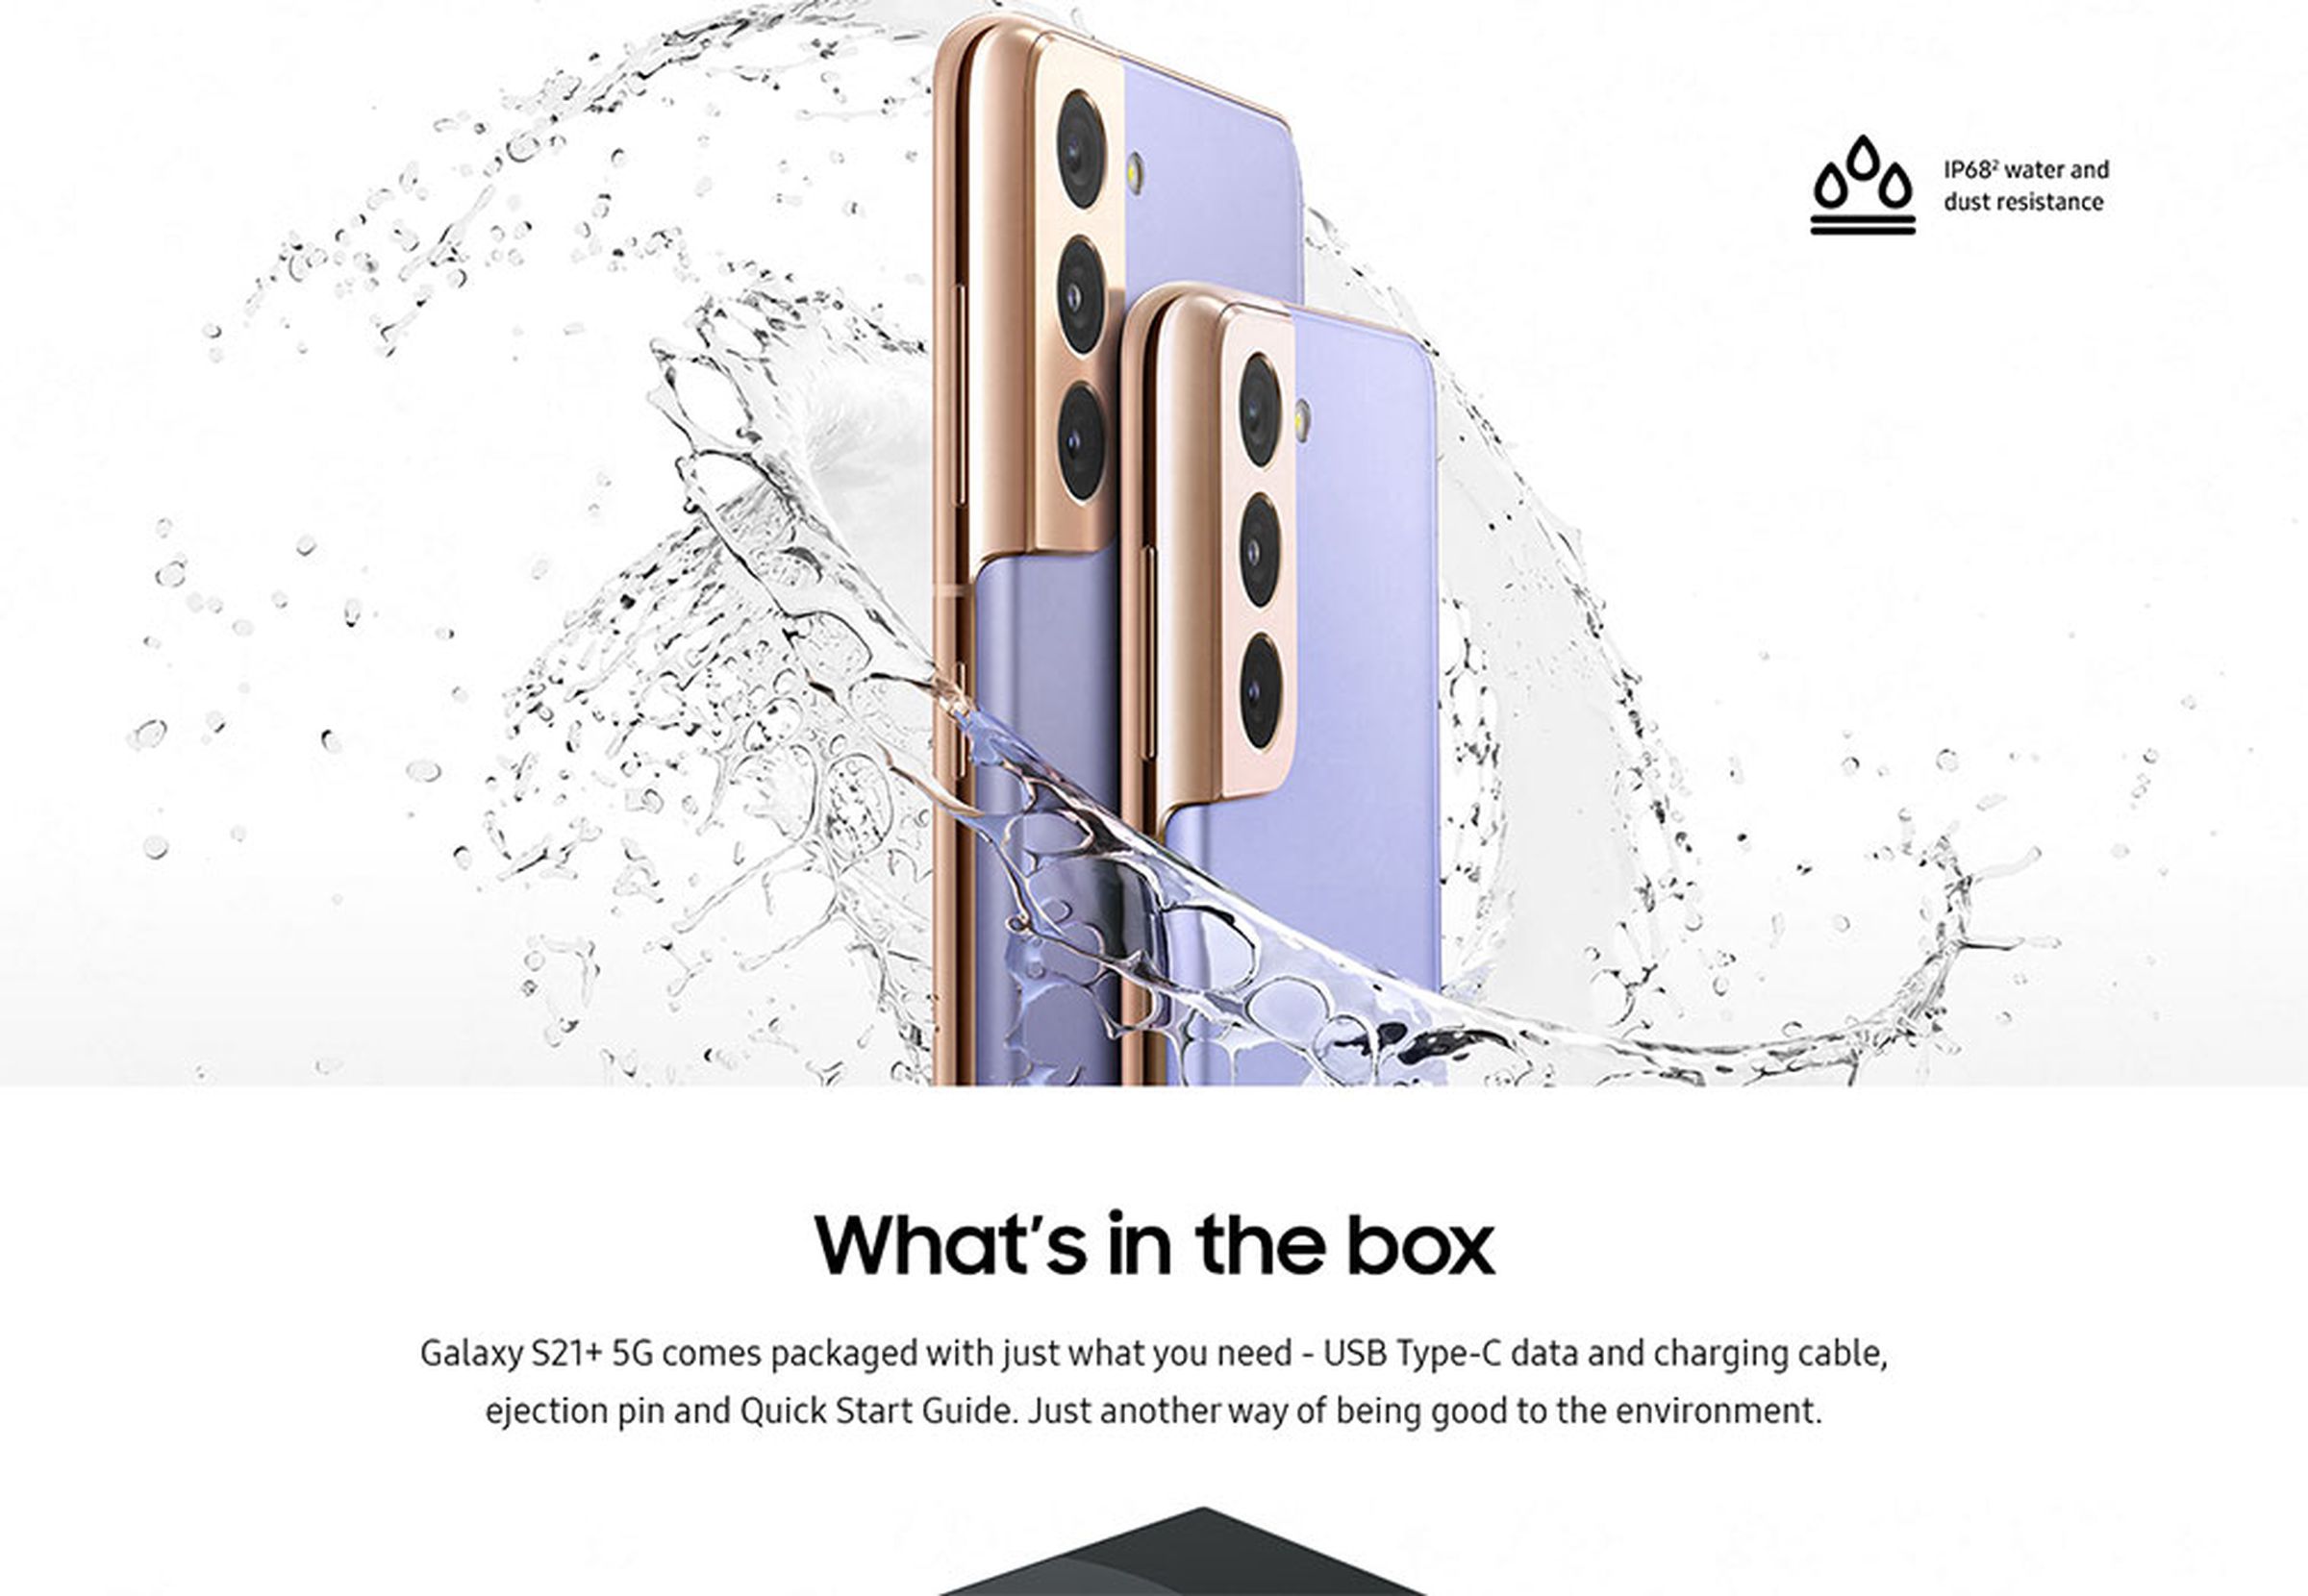 Screenshot of the Samsung website, which includes a picture of the phone and a caption reading “Galaxy S21+ 5G comes packaged with just what you need - USB Type-C data and charging cable, ejection pin, and Quick Start Guide. Just another way of being good to the environment.”